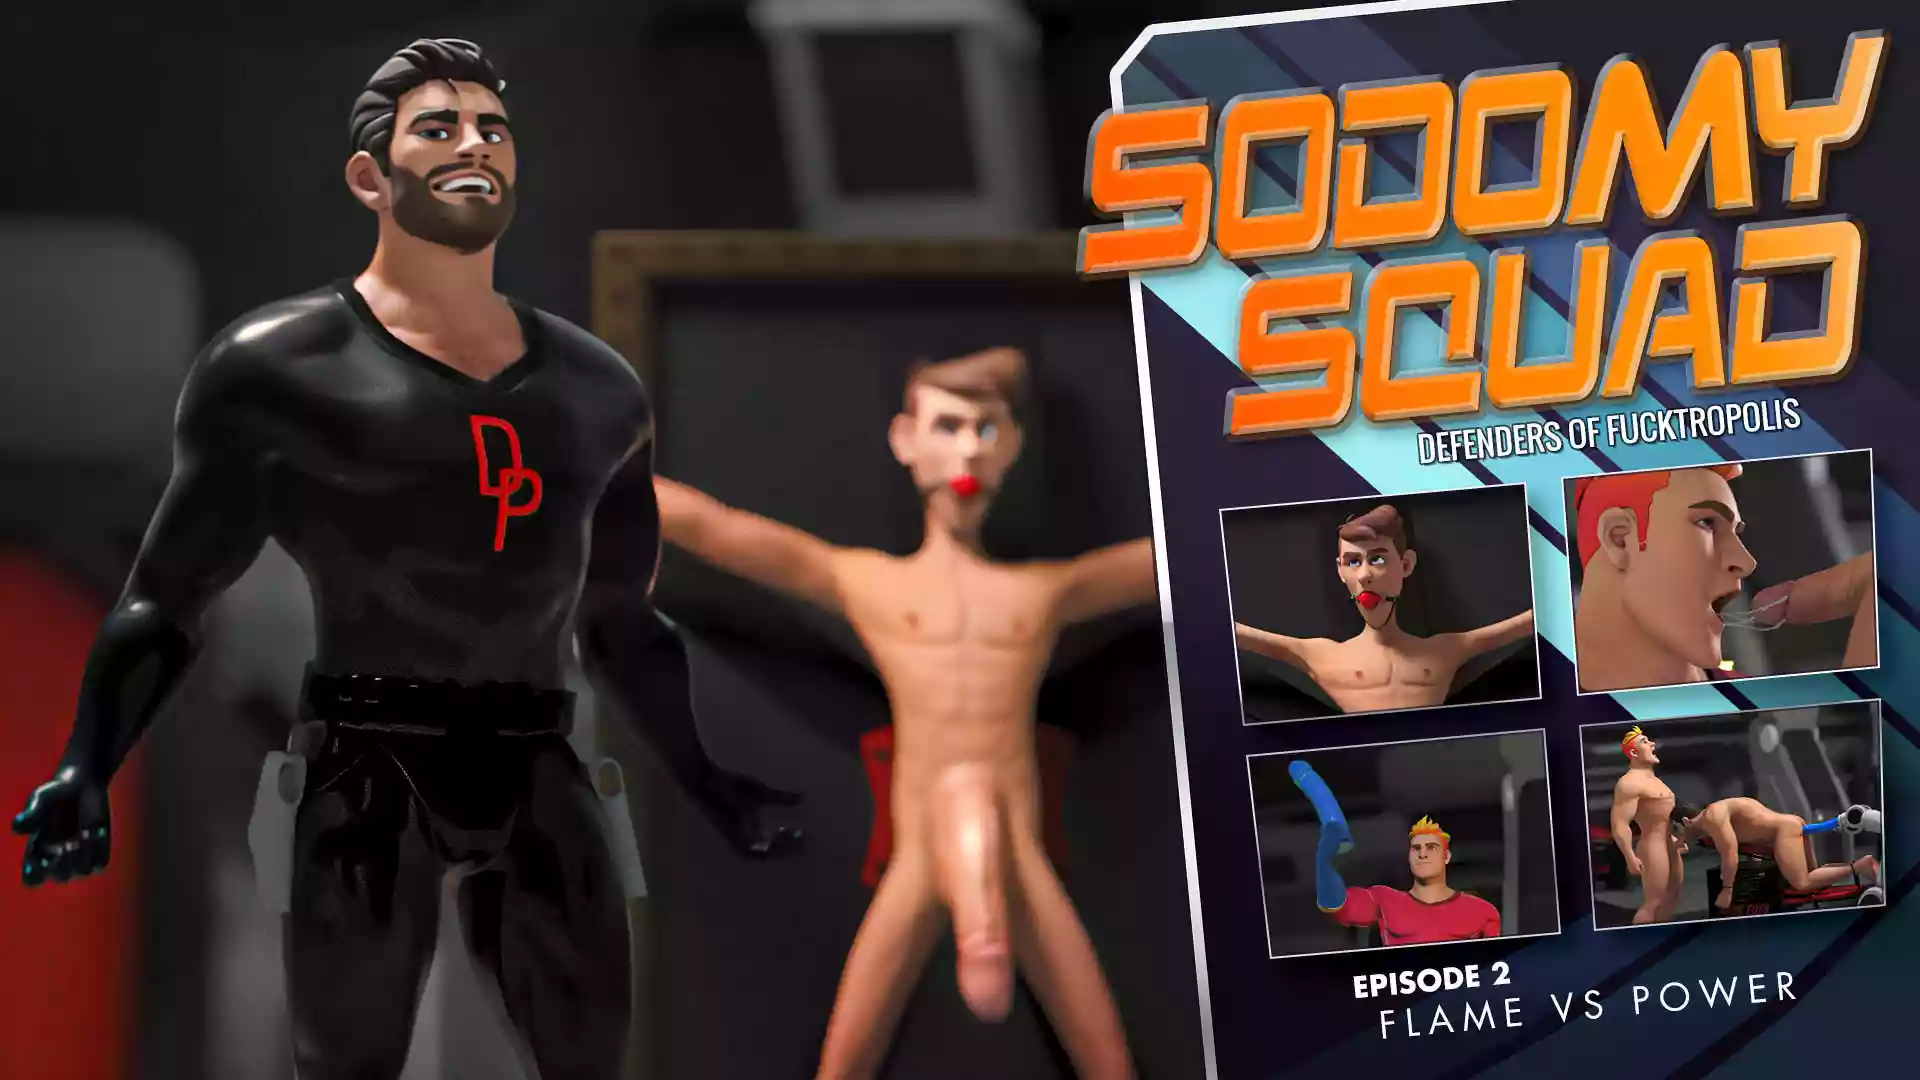 Sodomy Squad Episode 2, Flame Vs Power – Dr Power and Flame